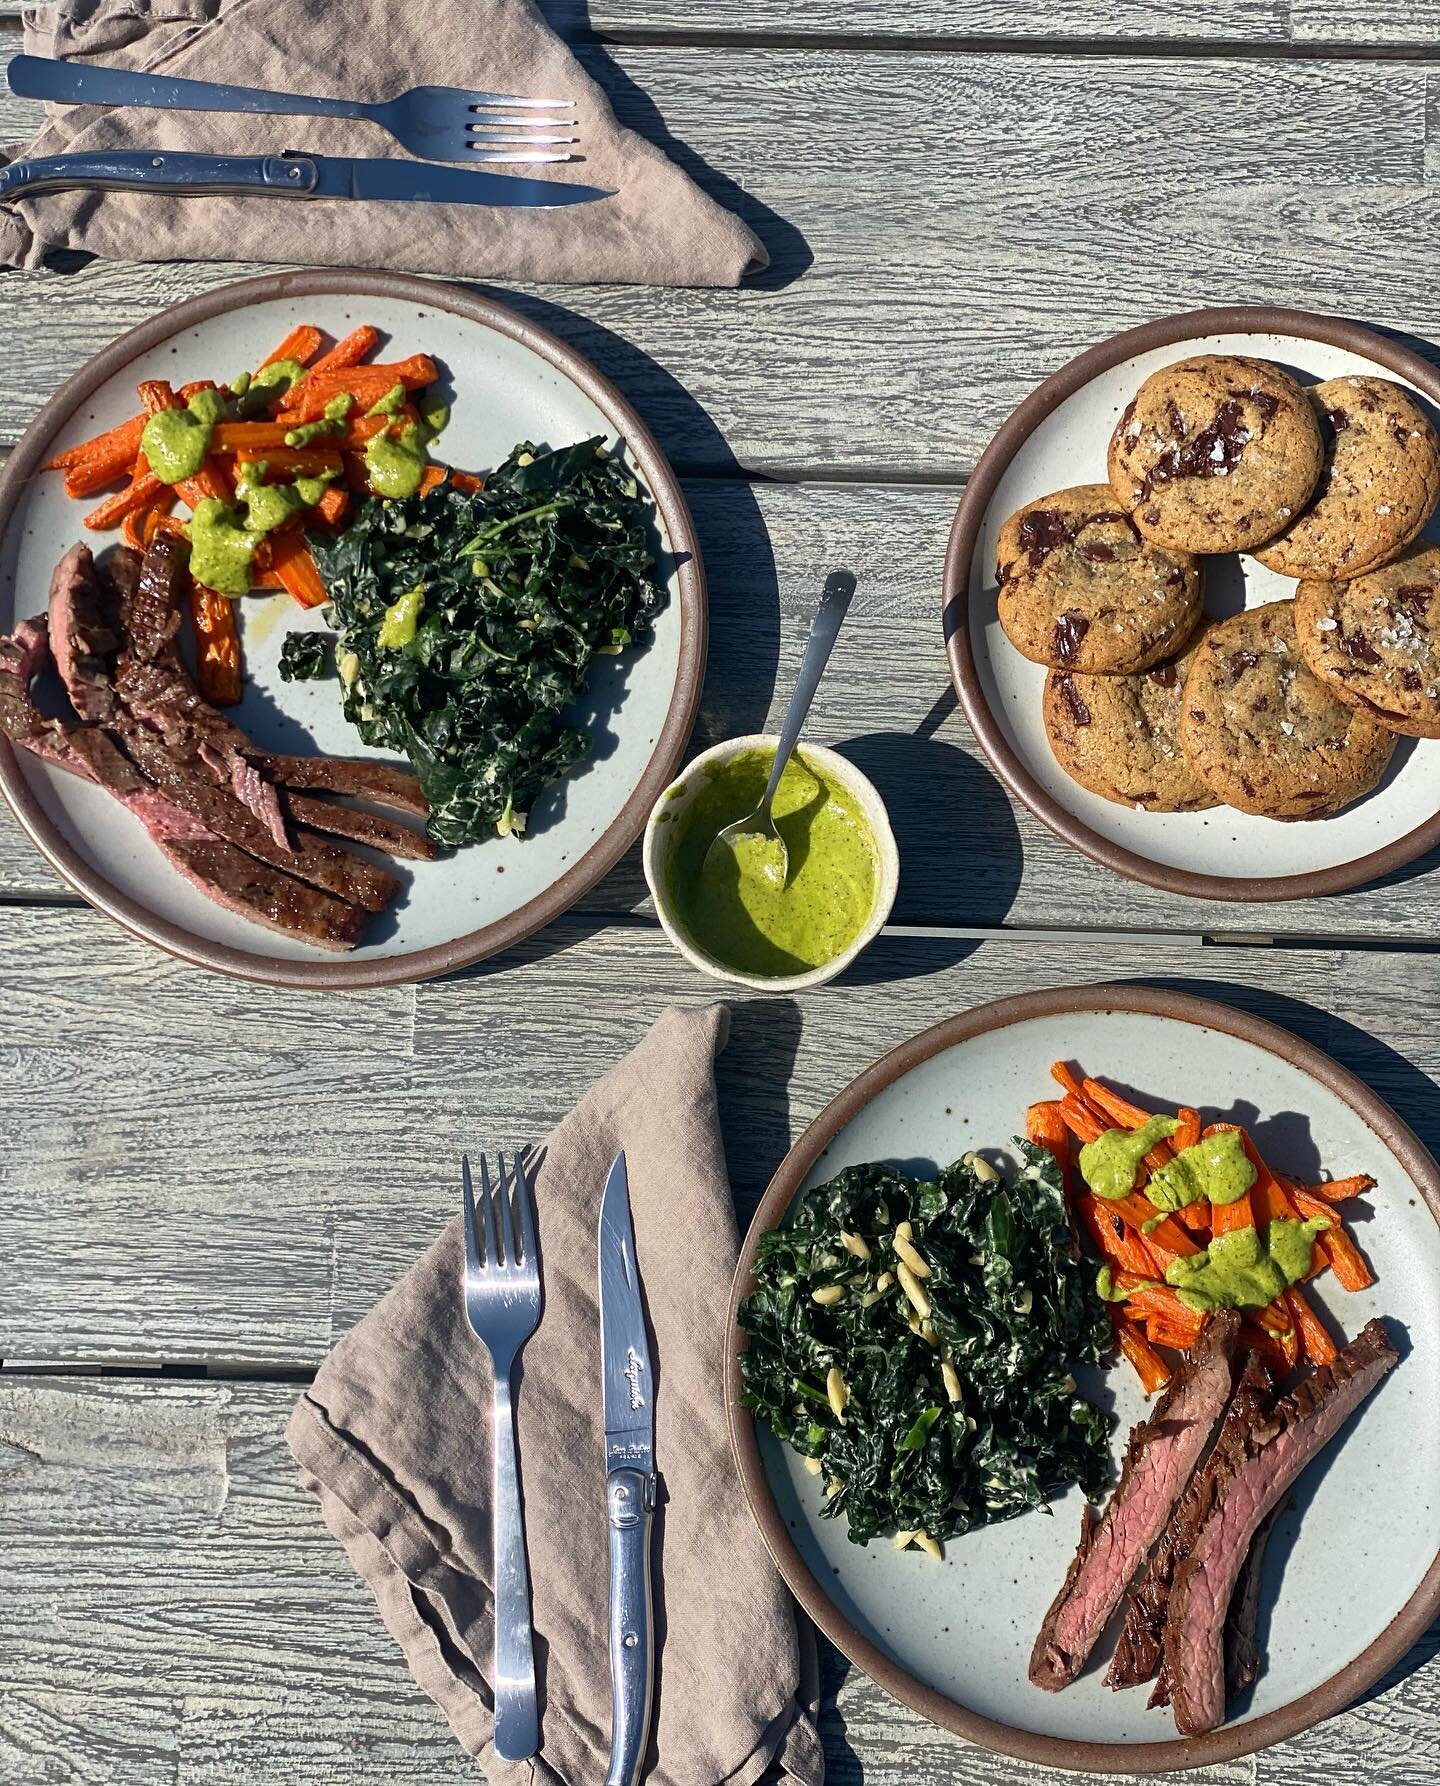 california bbqin&rsquo; class today. i love this menu so much:

burgundy pepper marinated flank steak
roasted carrots with salsa verde
kale salad with tahini avocado dressing
brown butter chocolate chip cookies

this is the perfect meal in my eyes, a